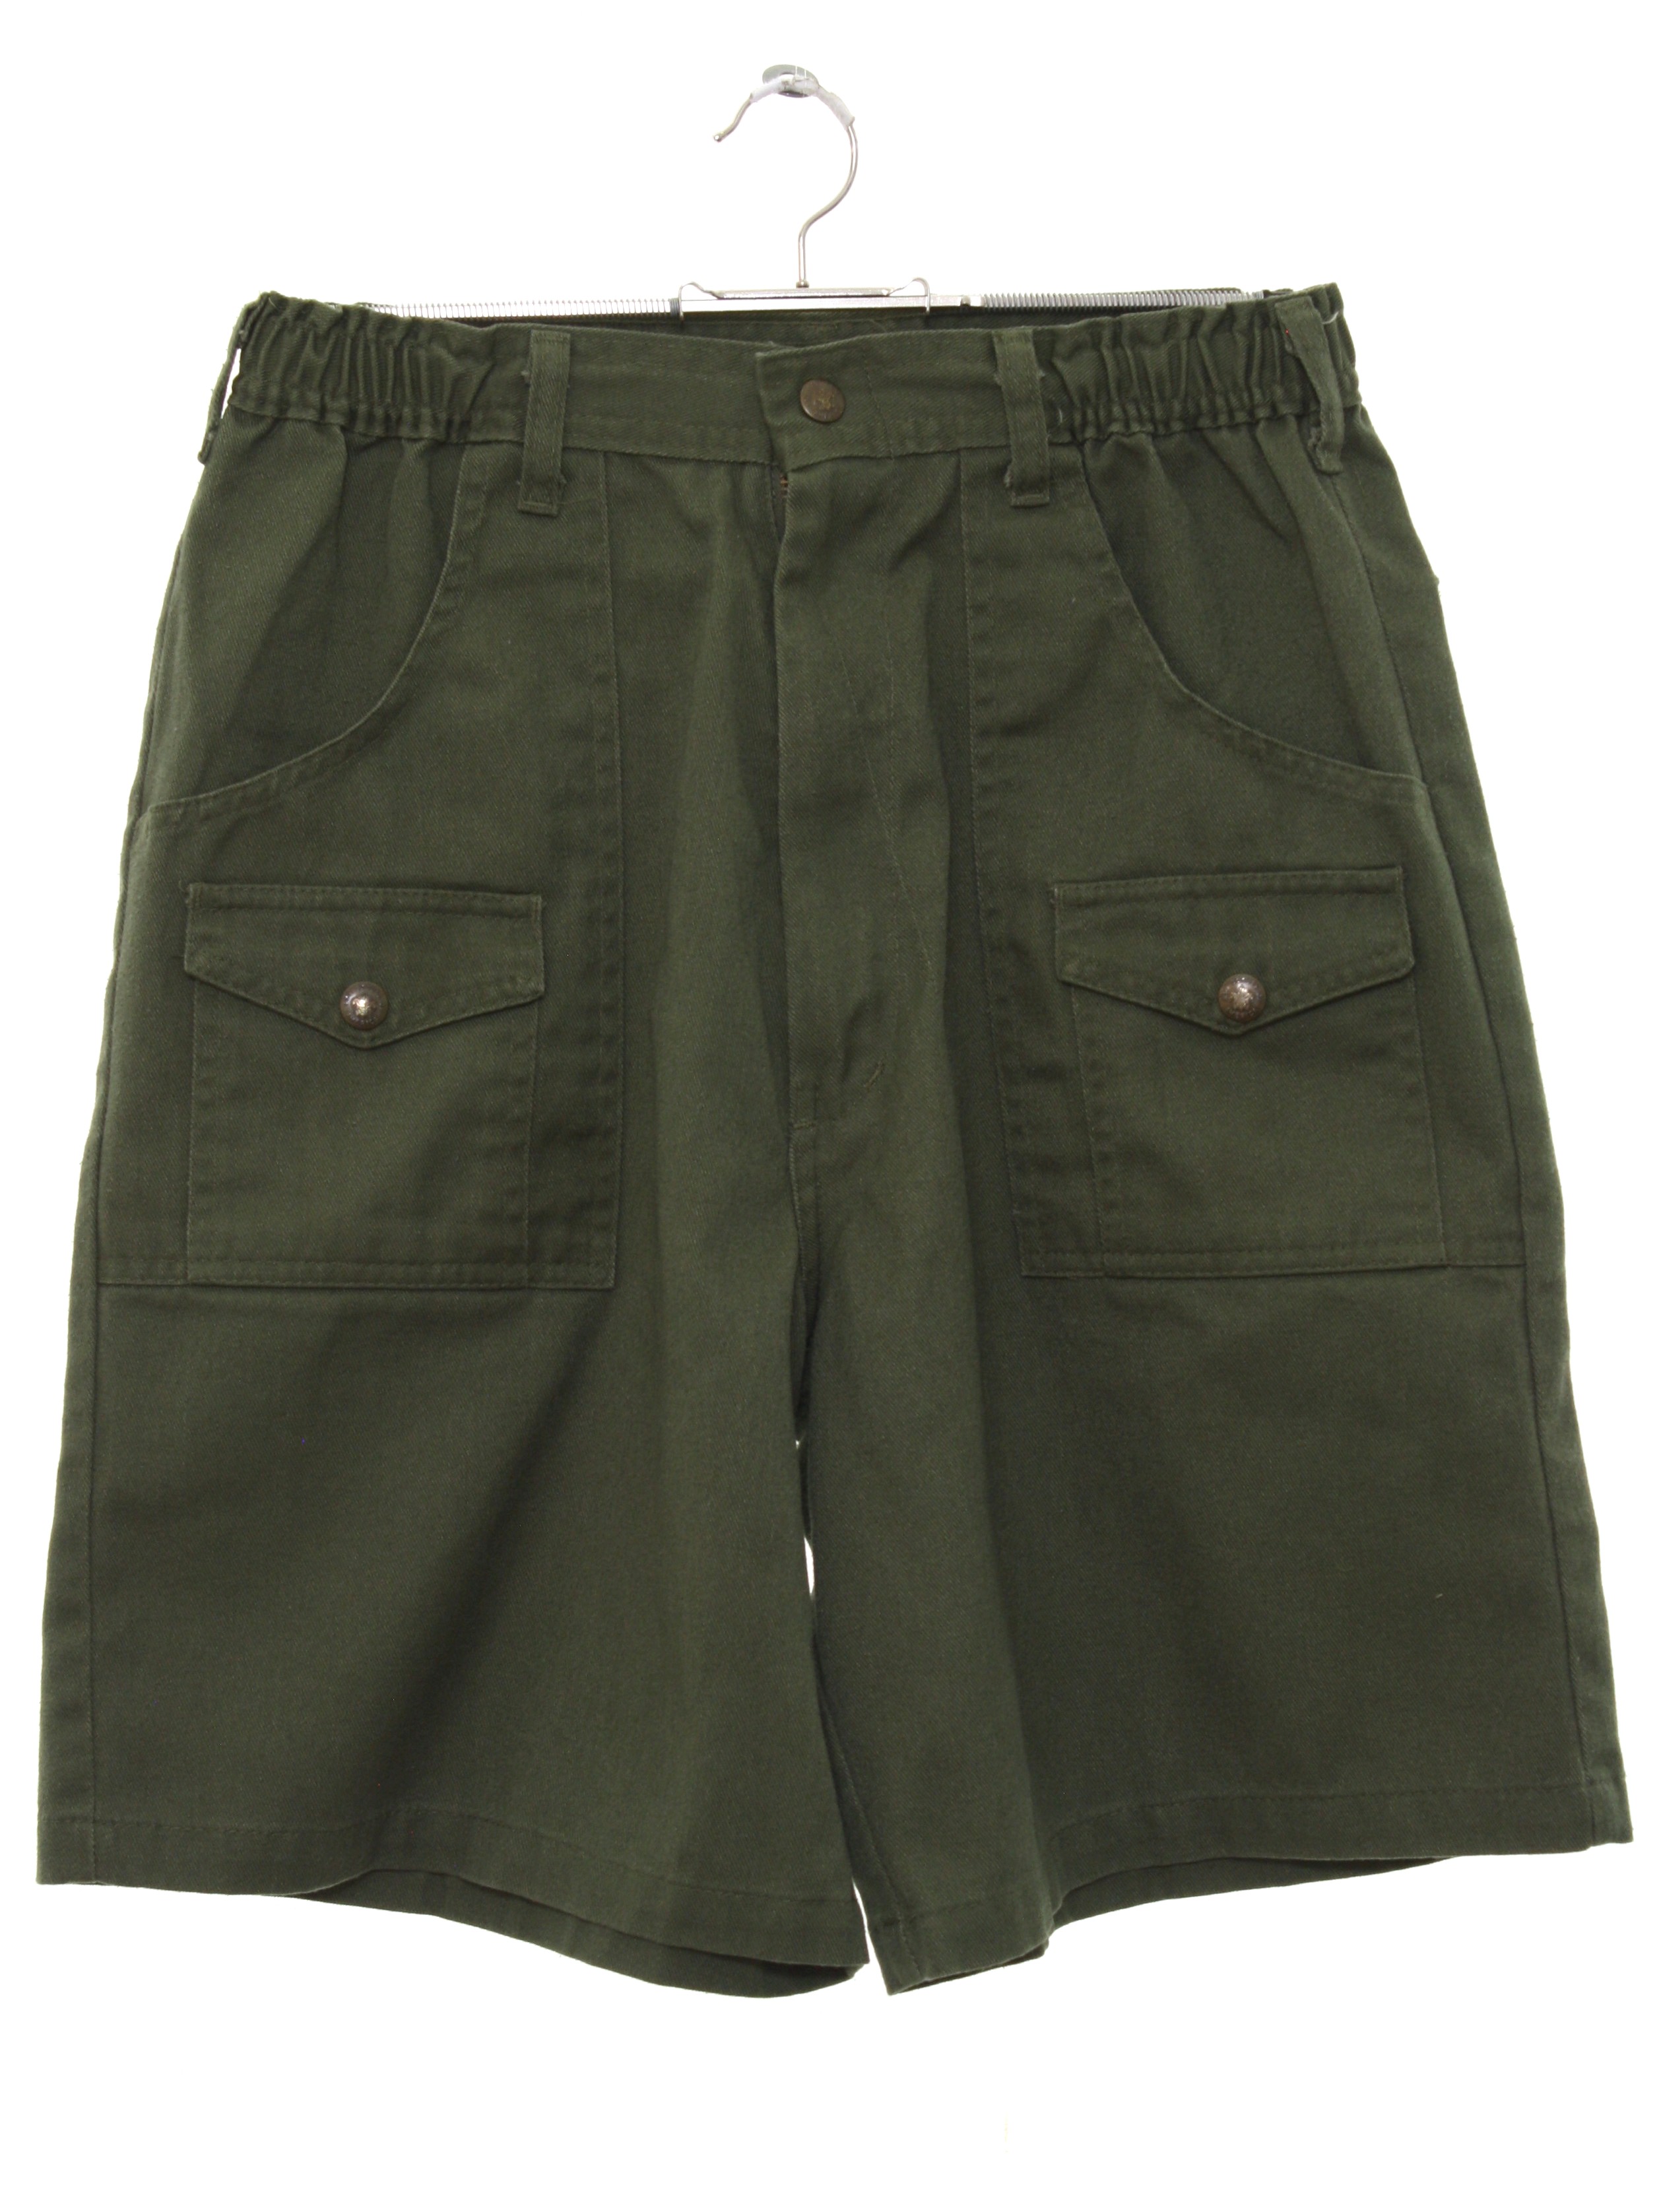 1980s Vintage Shorts: Late 80s or Early 90s -Boy Scouts of America ...